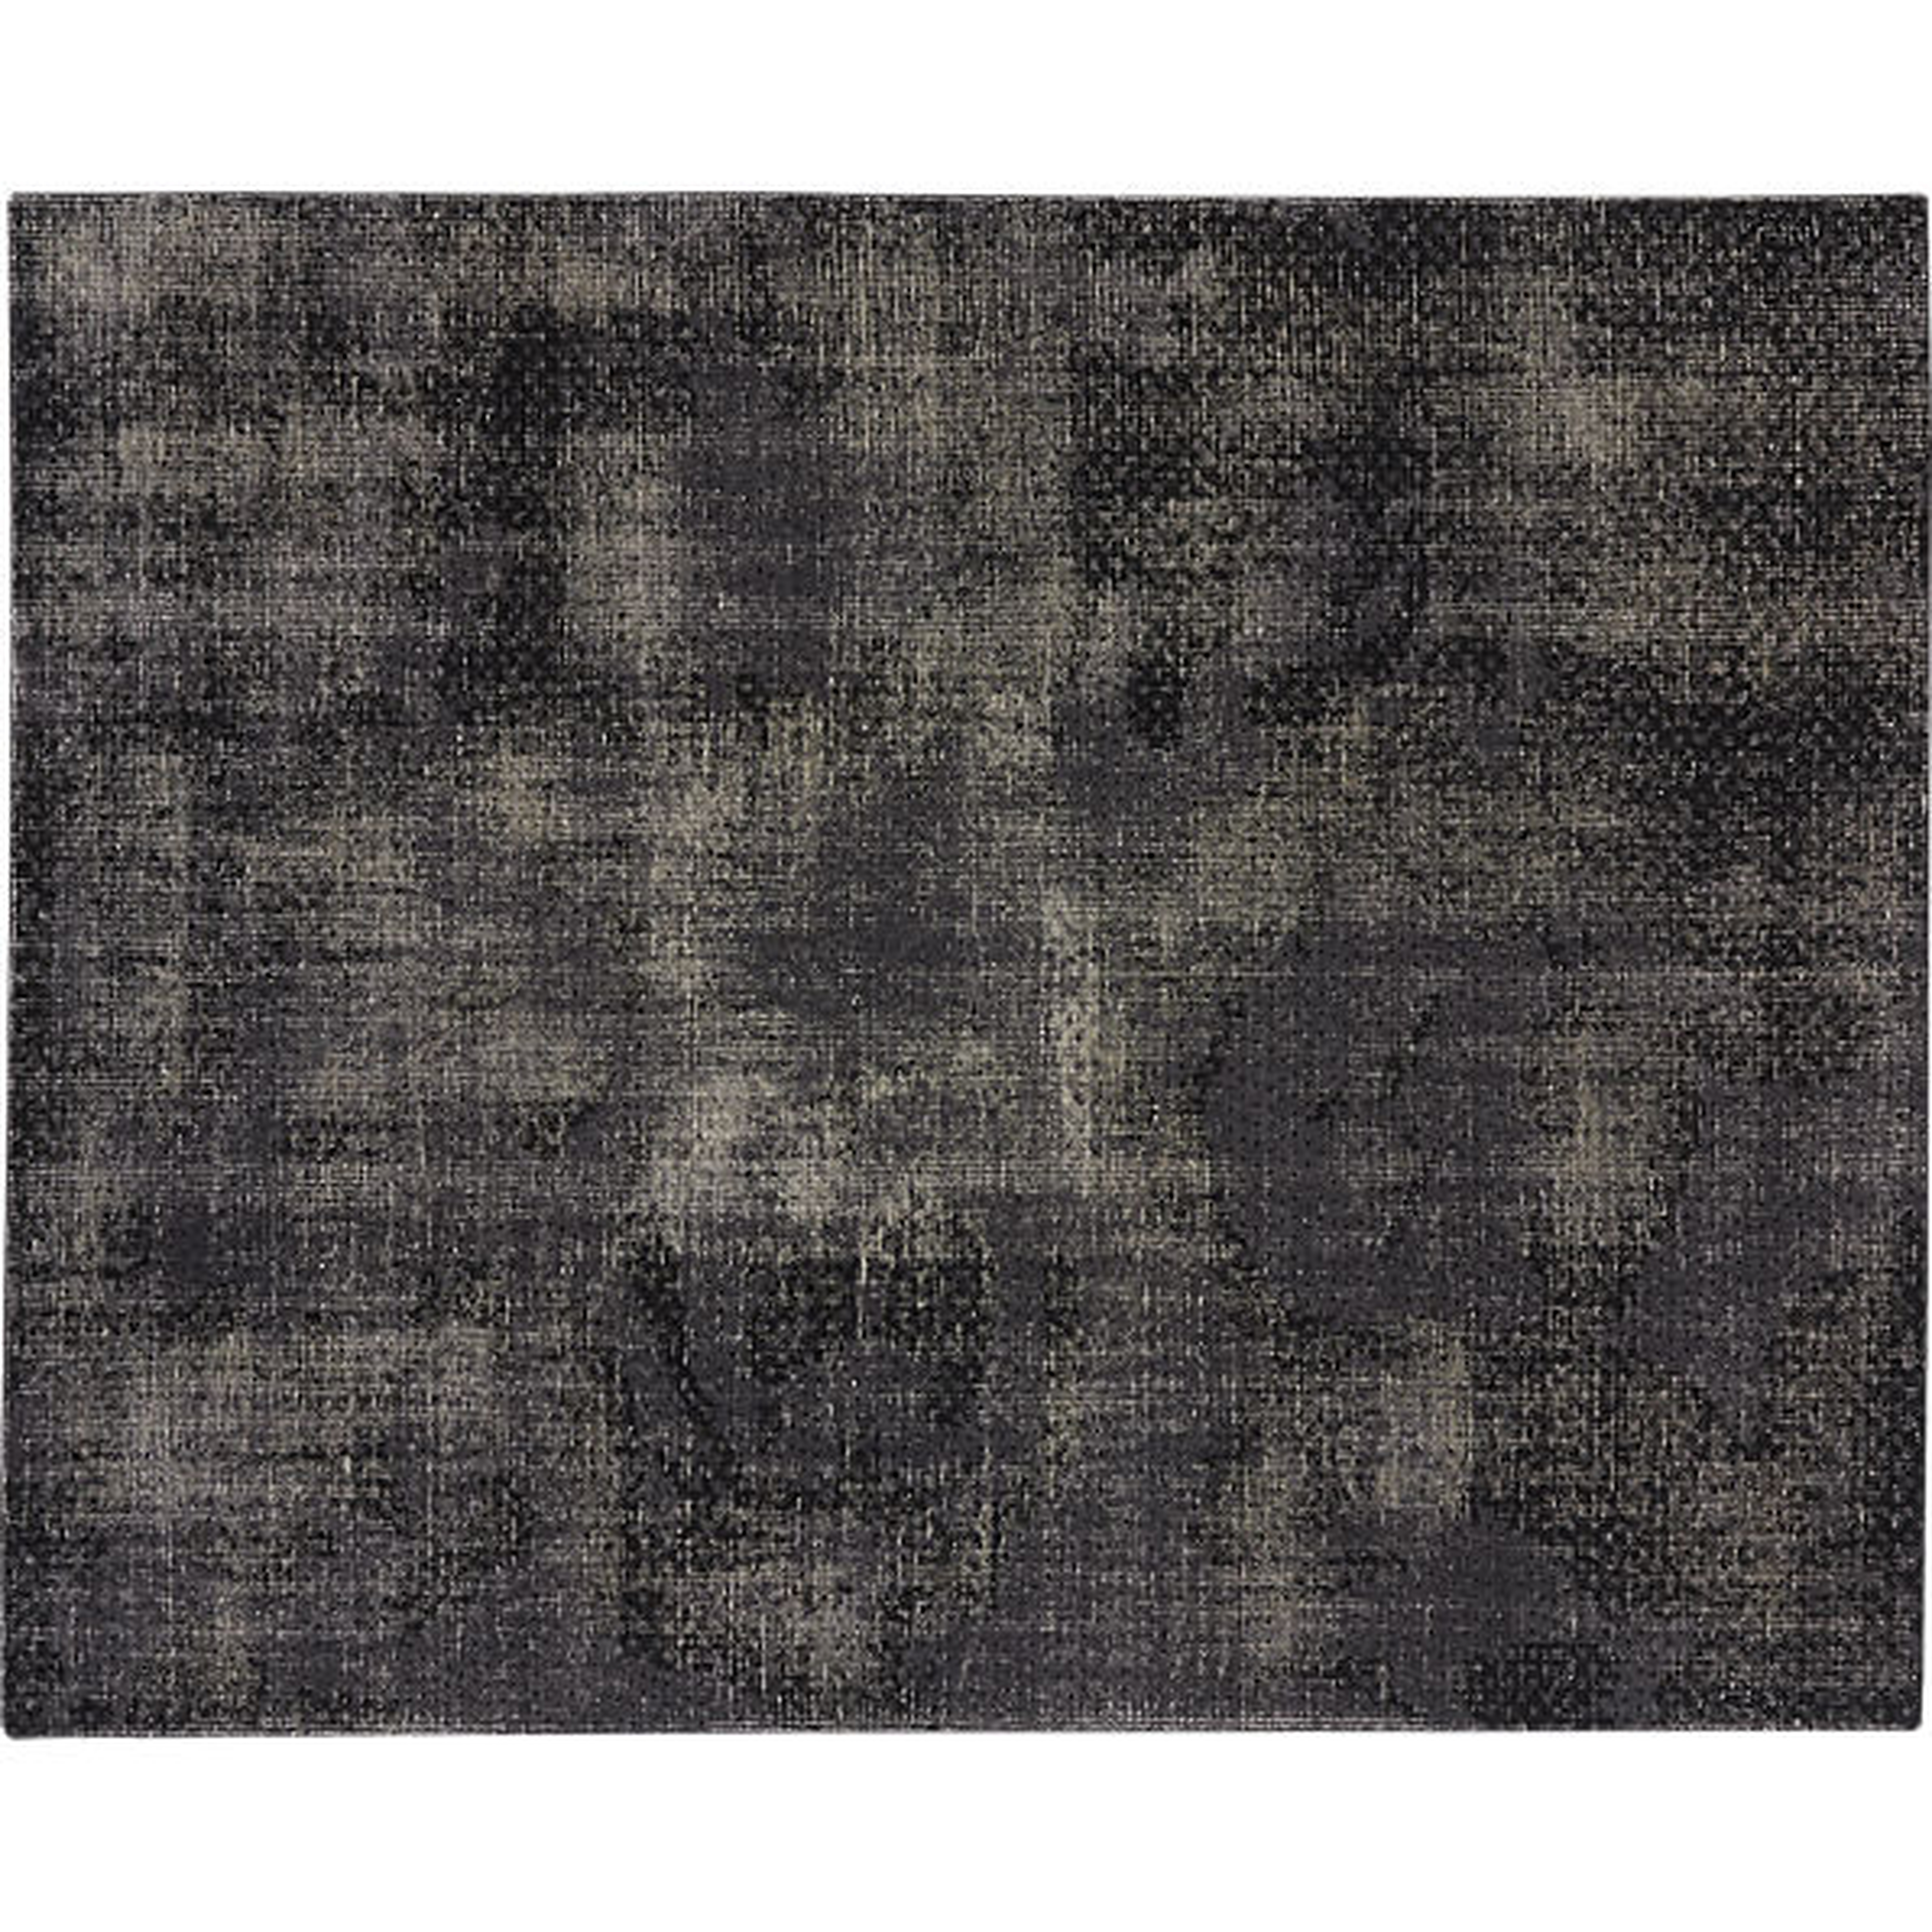 the hill-side disintegrated floral grey rug - CB2